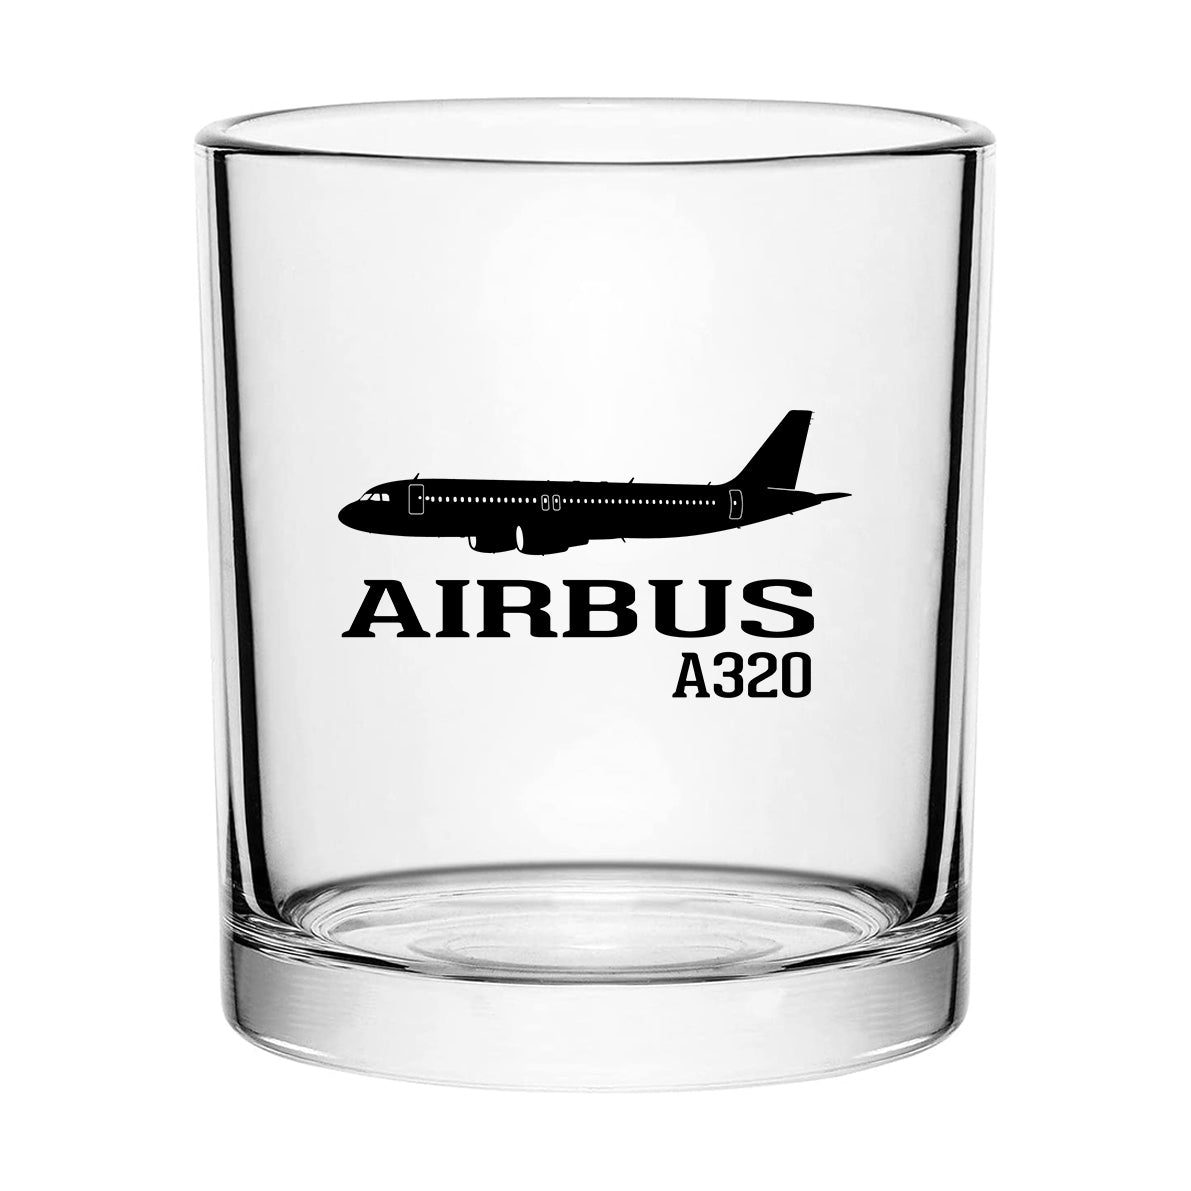 Airbus A320 Printed Designed Special Whiskey Glasses